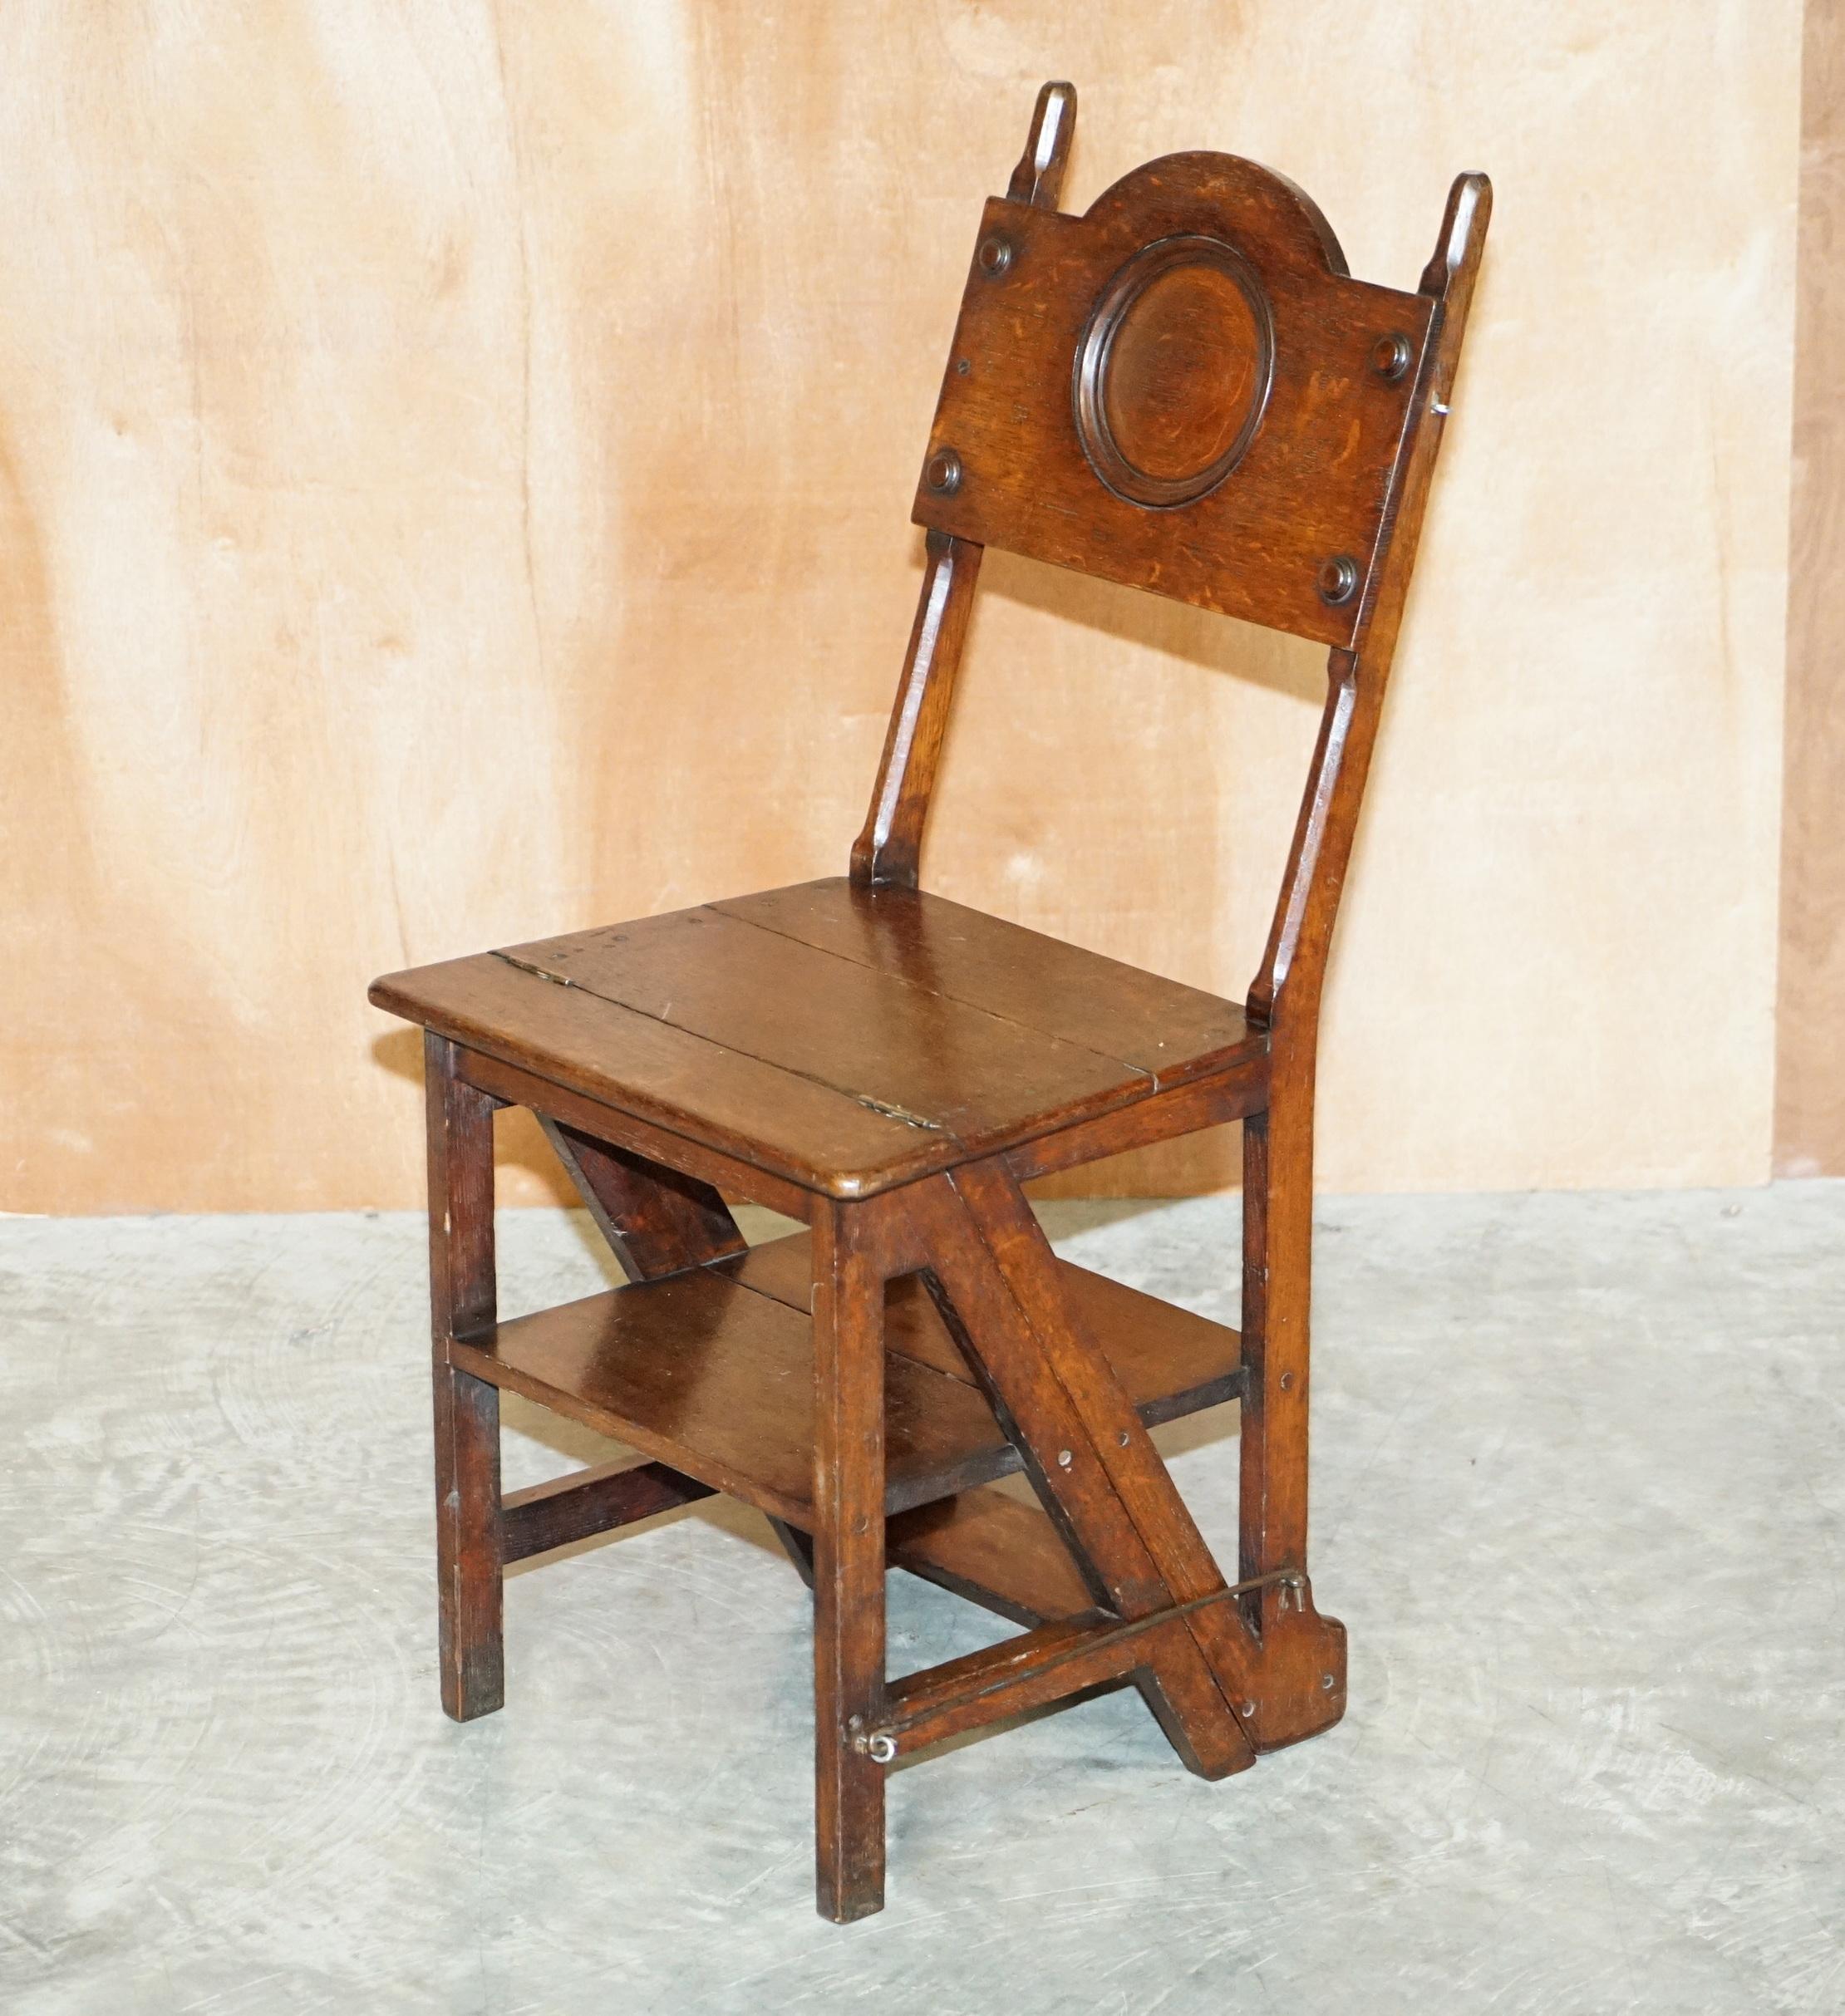 We are delighted to offer for sale this lovely antique Victorian metamorphic library steps chair in hand carved oak

A very charming and highly collectable piece, designed as an at home library steps and reading chair, these are used to add a